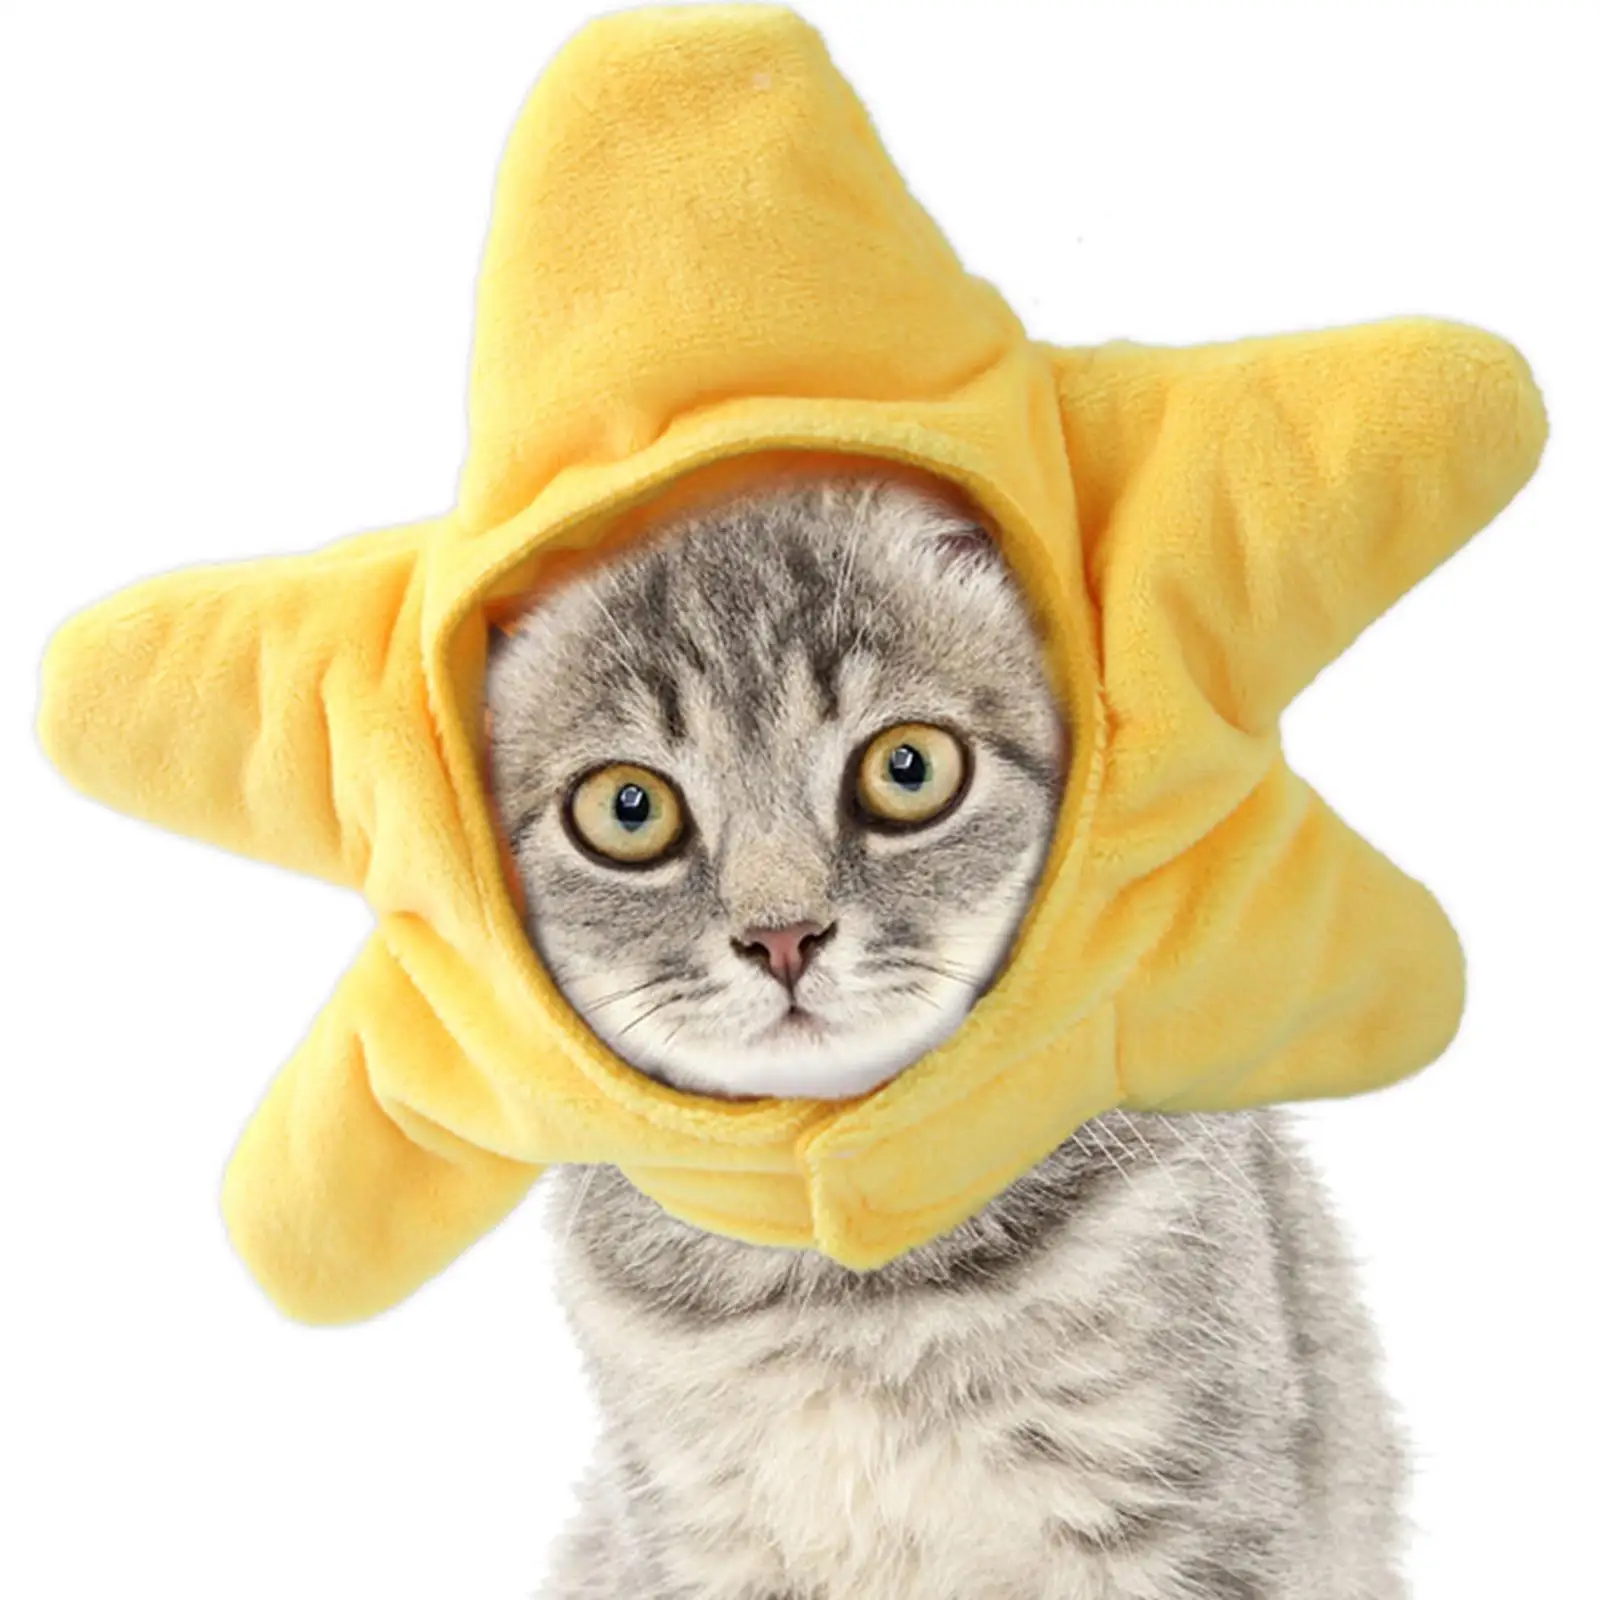 Cat Hat Yellow Shaped Plush Headwear Cap Adorable for Small Dogs Festival Theme Party Dress up